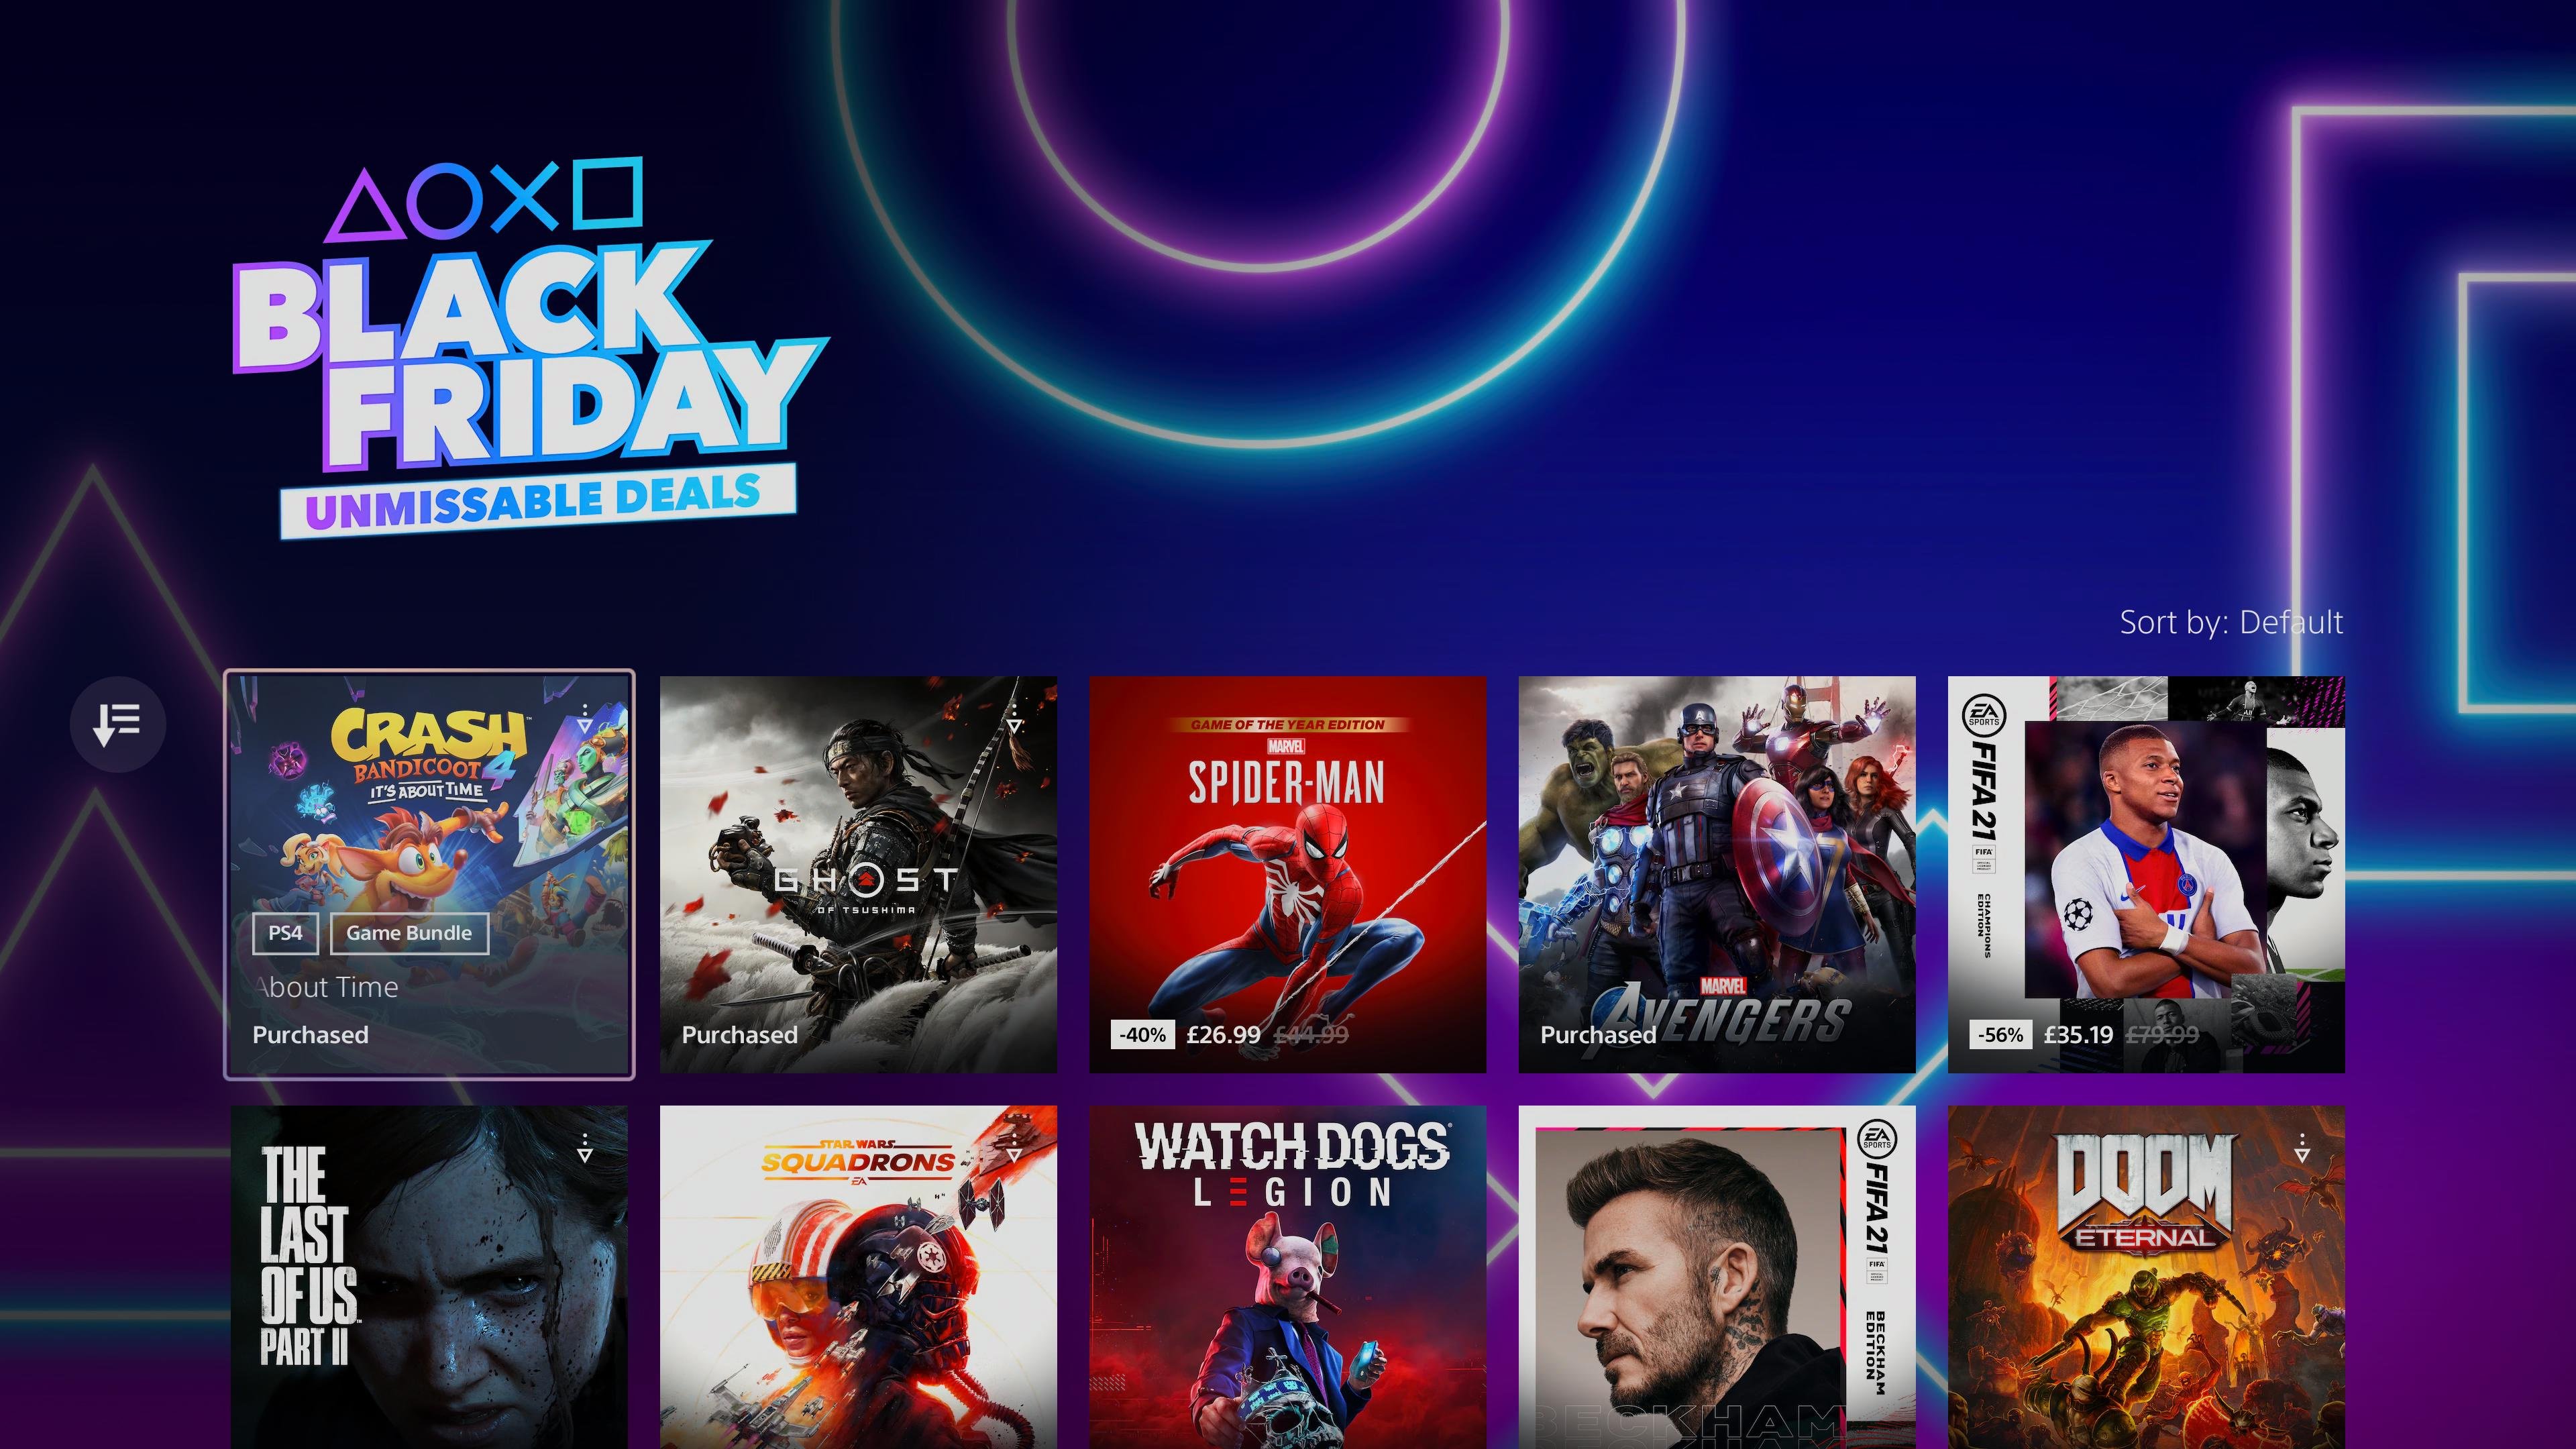 PS5 Now Lists Black Friday Sale in PS Store, But No Deals Section Yet - Does Playstation Store Do Black Friday Deals